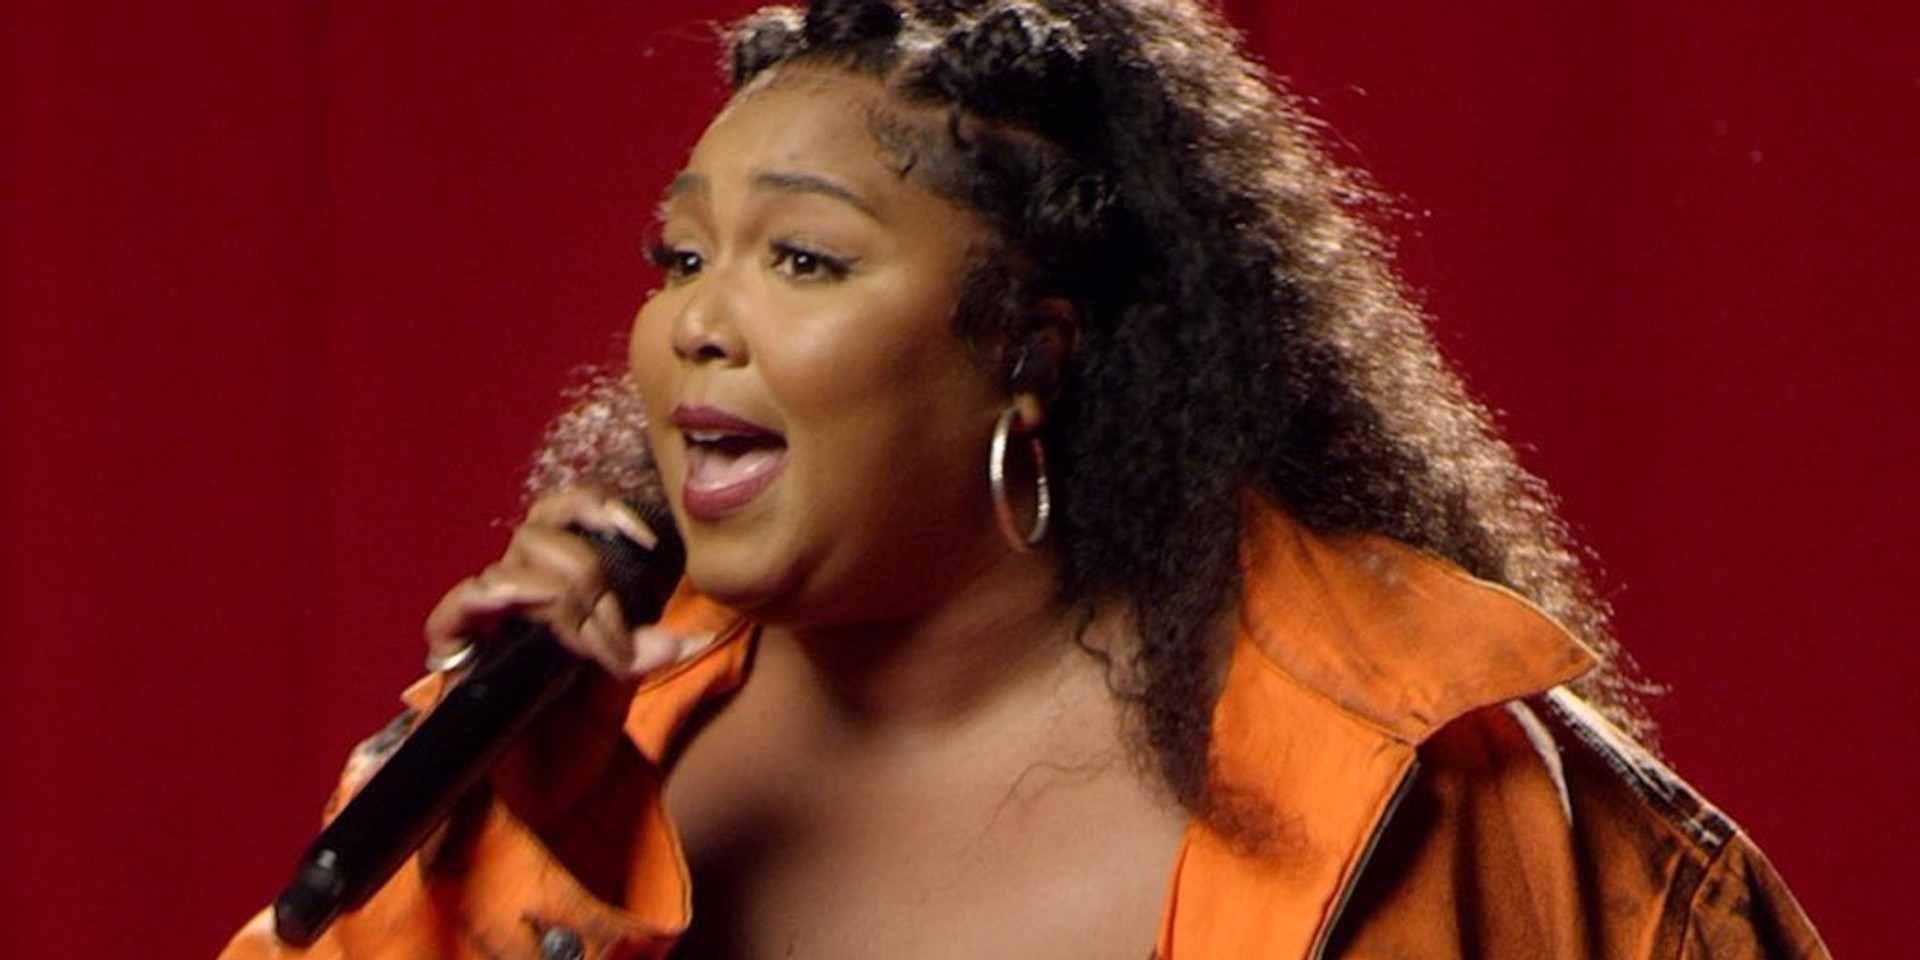 Lizzo cover BTS' 'Butter' on BBC Radio 1's Live Lounge – watch